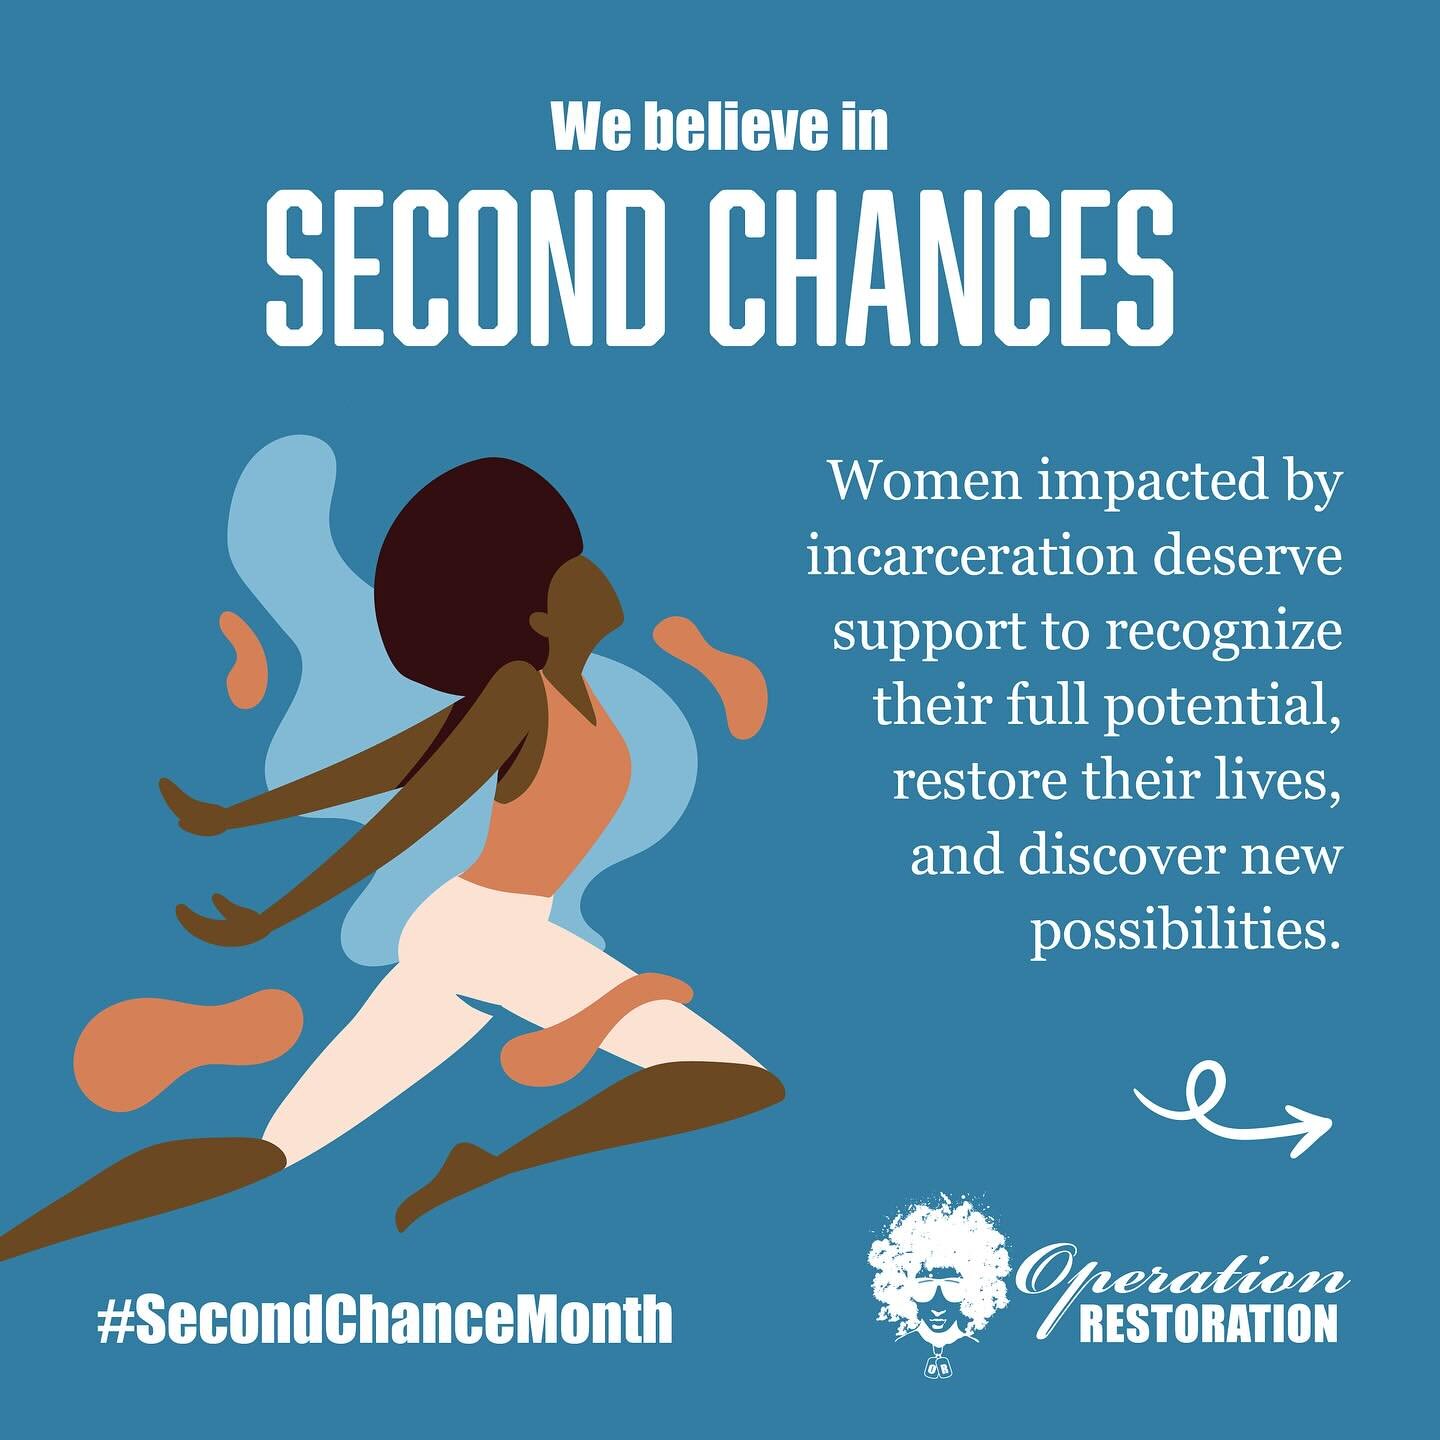 When a woman or girl walks into Operation Restoration, they automatically receive a second chance. 🫂 For many, it may also be the first chance in their lives that they&rsquo;ve owned their dignity, explored their potential, or received a warm, reass